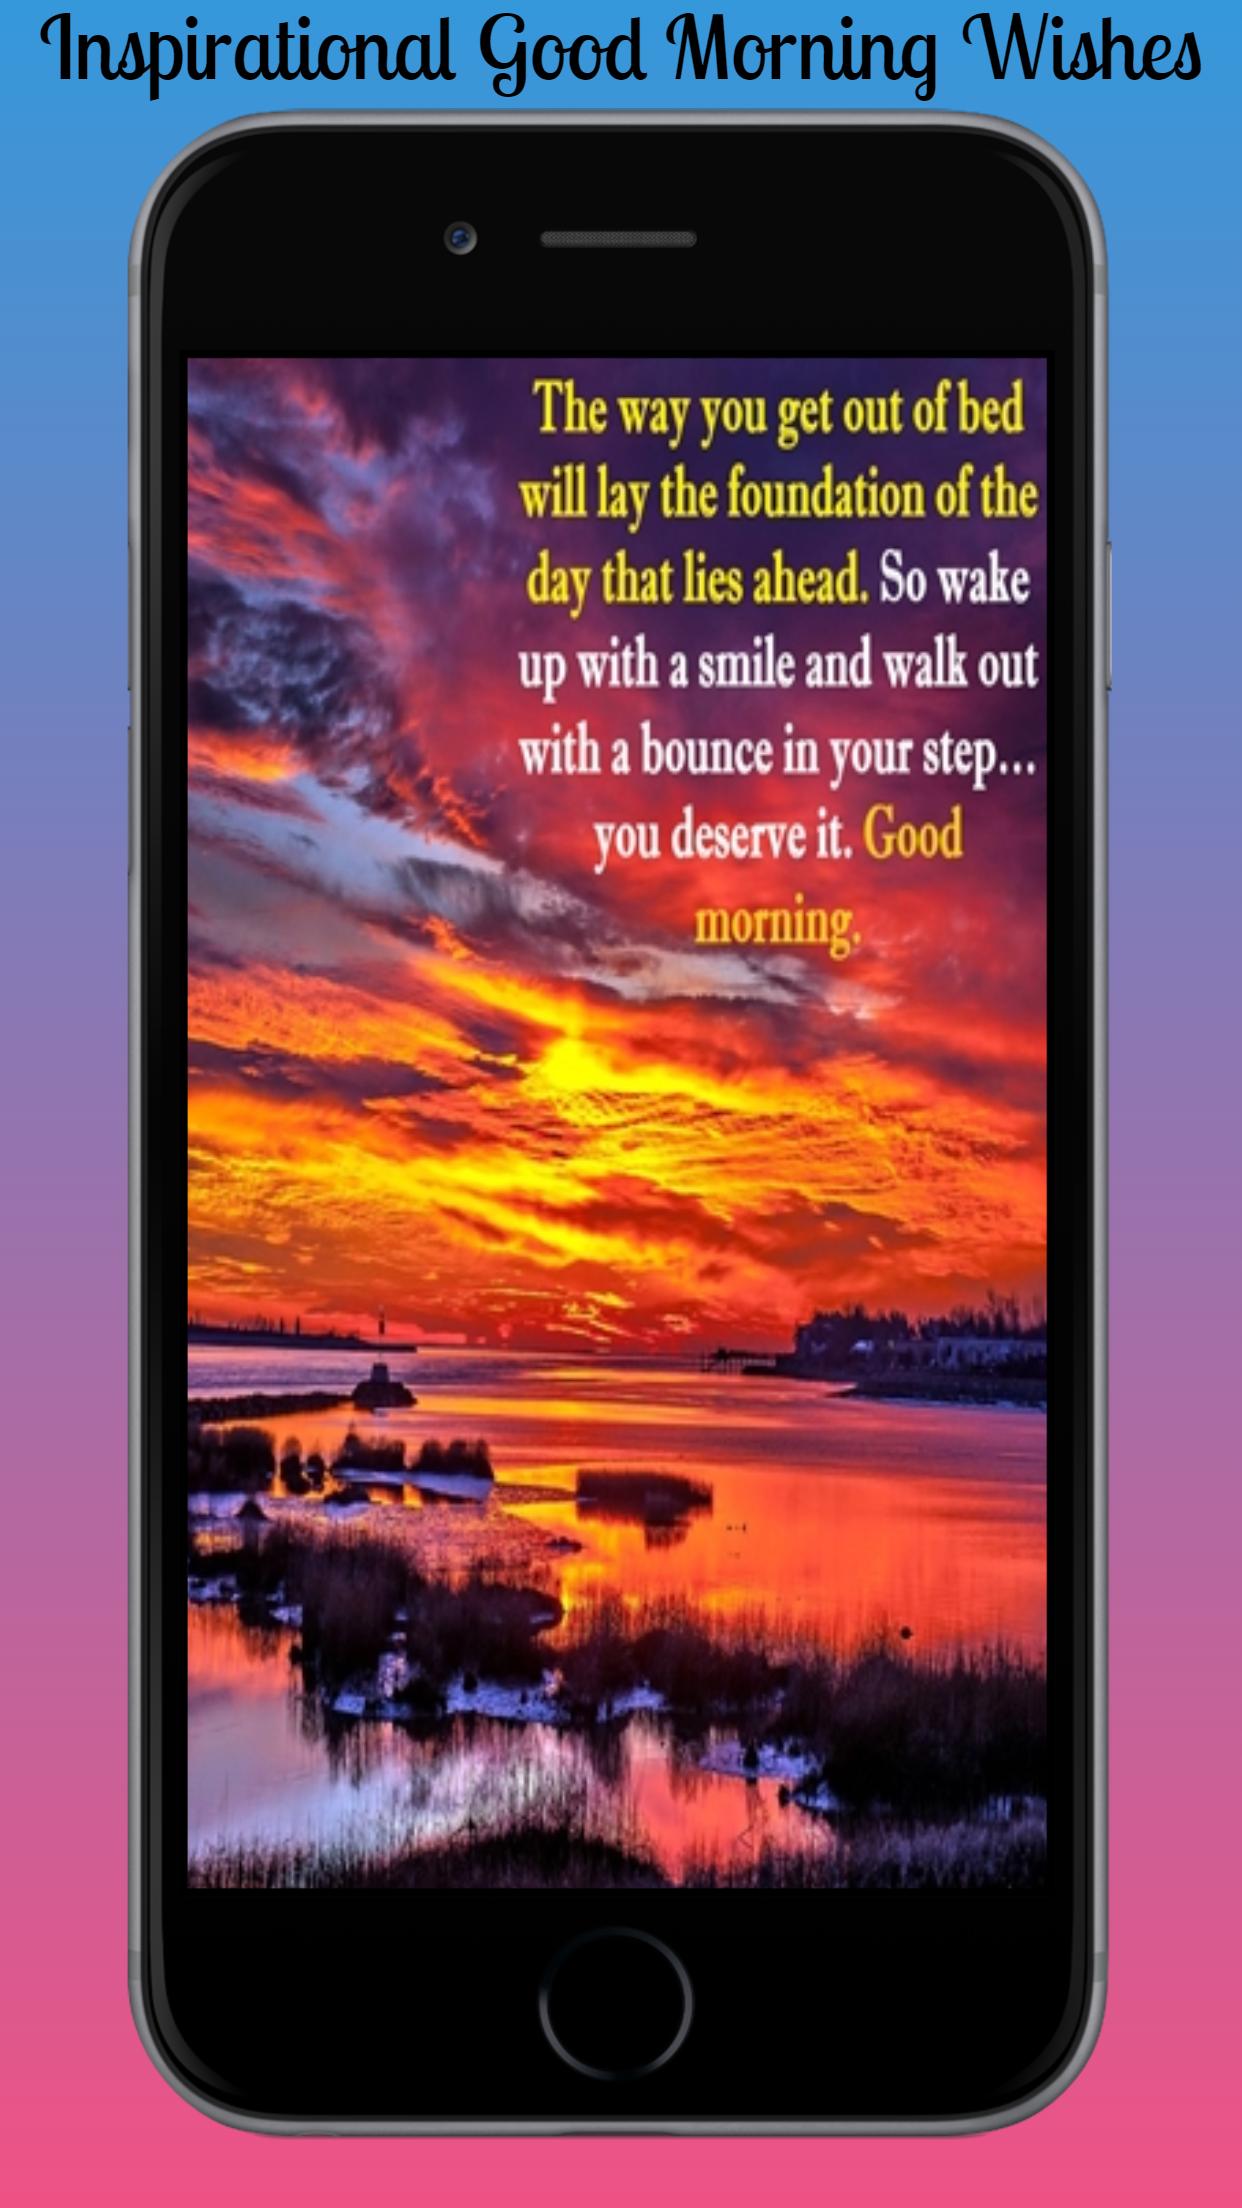 Inspirational Good Morning Messages,Wishes&Quotes 2.0 Screenshot 1